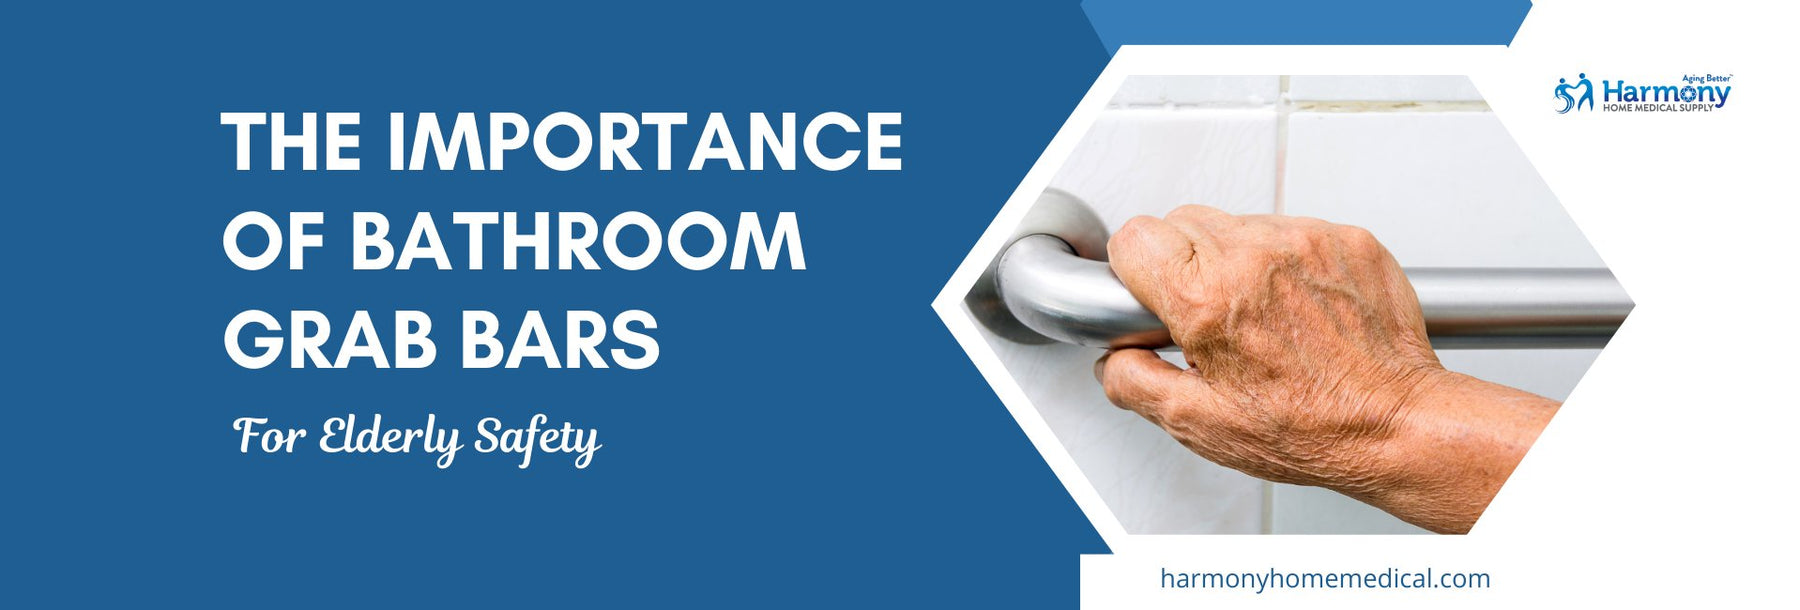 The Importance of Bathroom Grab Bars for Elderly Safety: A Comprehensive Guide - Harmony Home Medical Supply